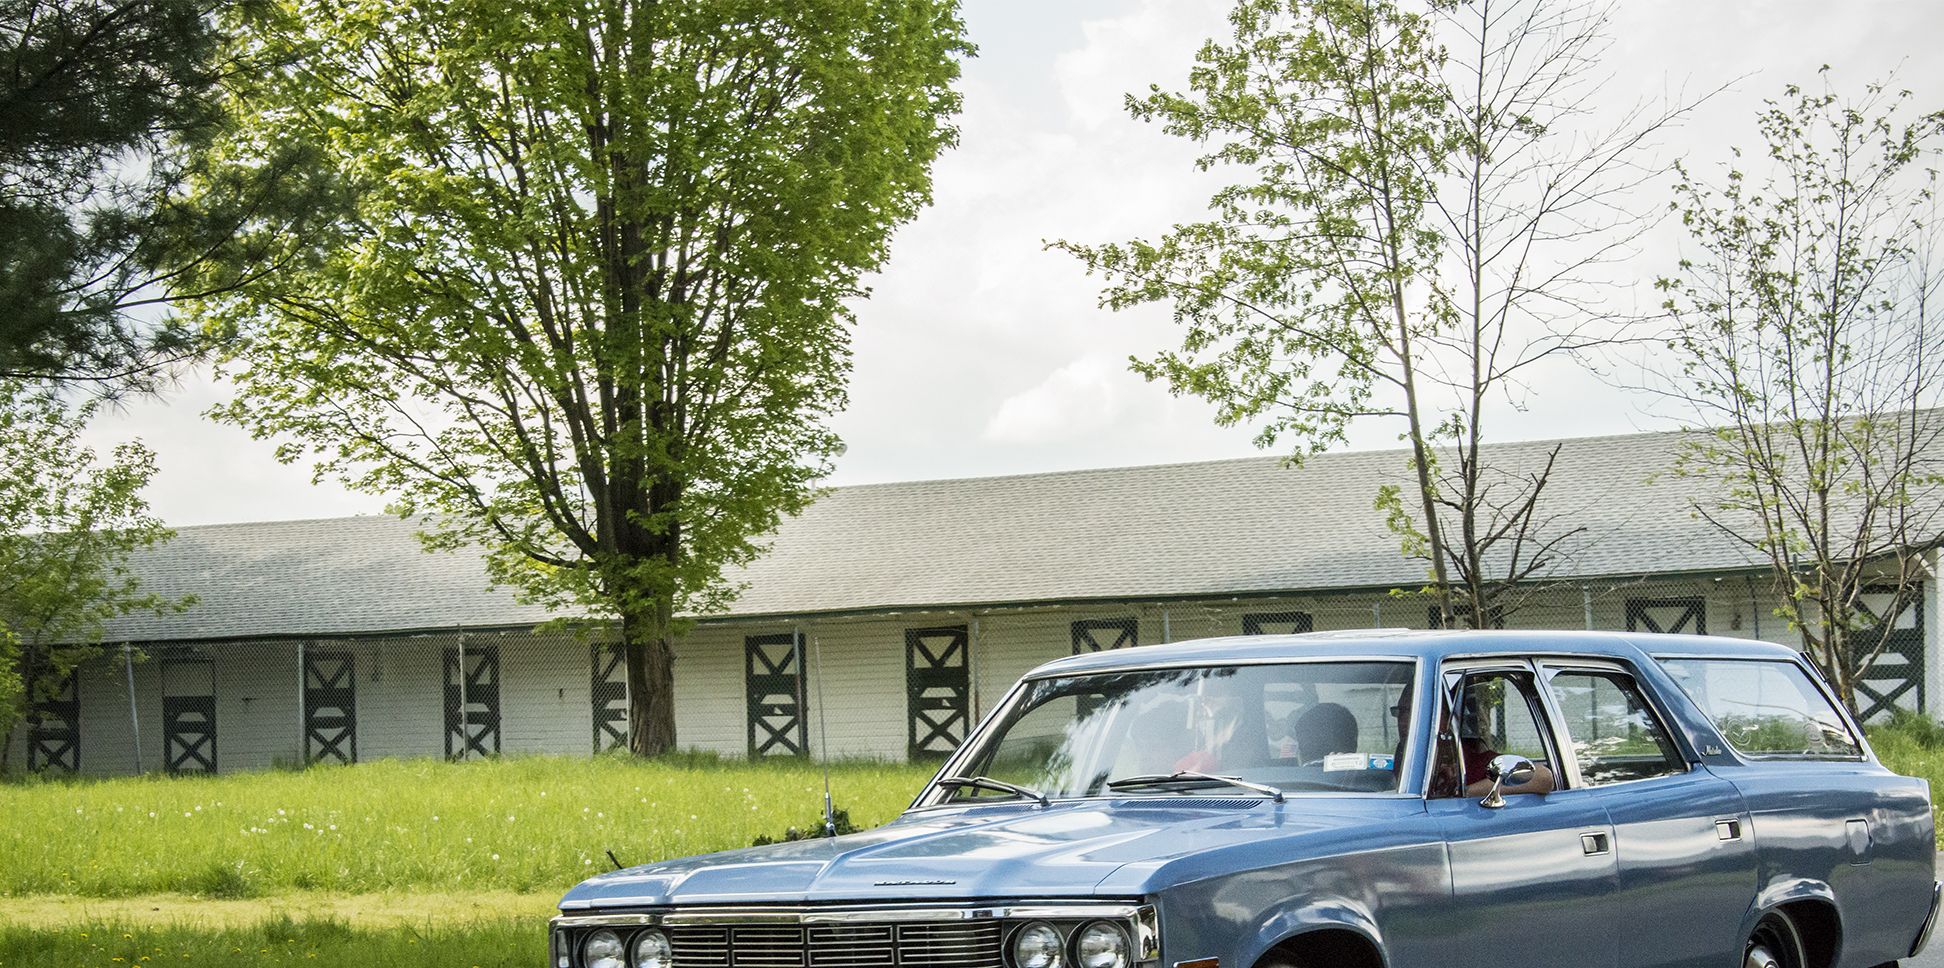 Rhinebeck Gears Up for Spring Car Show Next Month